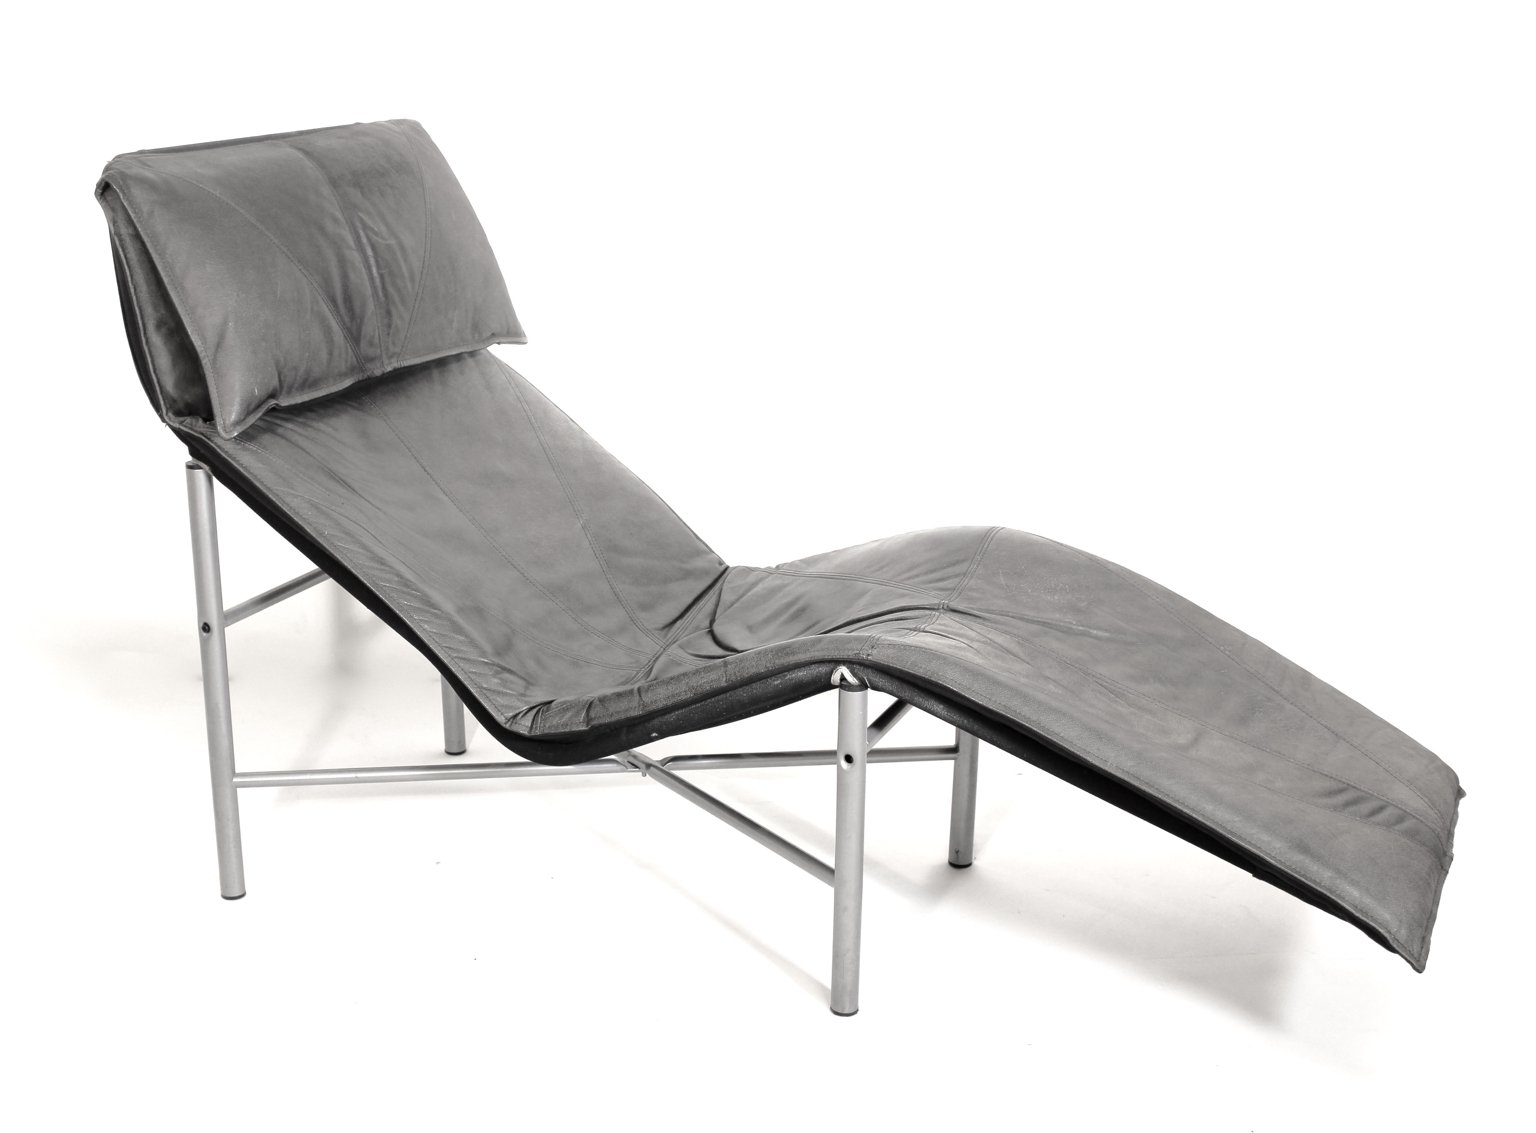 leather chaise longue by tord bjorklund 1970s NB-188750